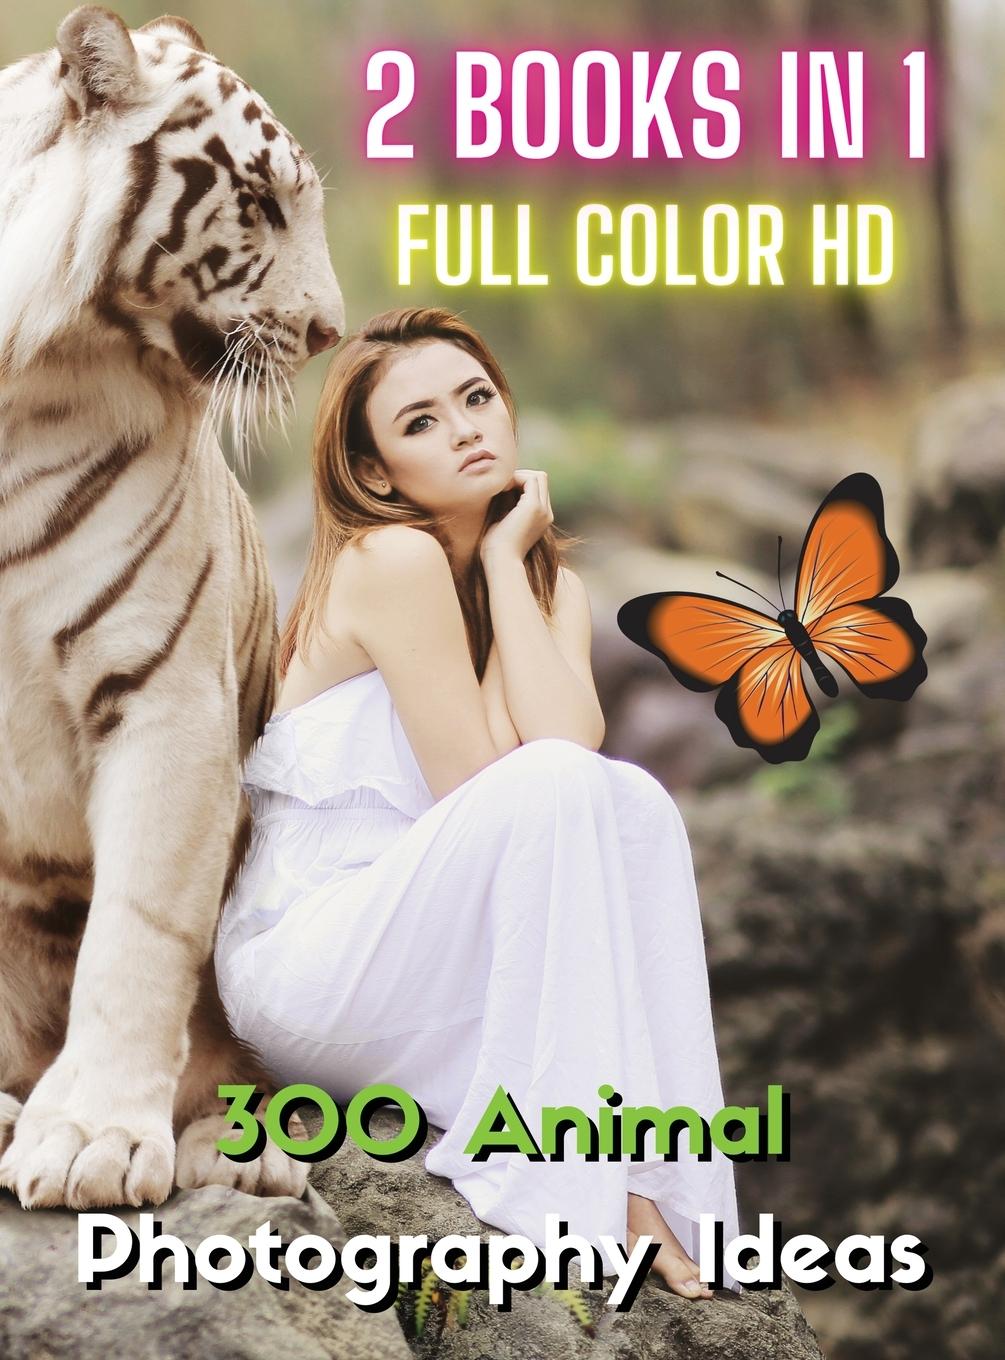 Carte [ 2 Books in 1 ] - Stock Photos and Professional Prints! 300 Animal Photography Ideas - HD Full Color Version 